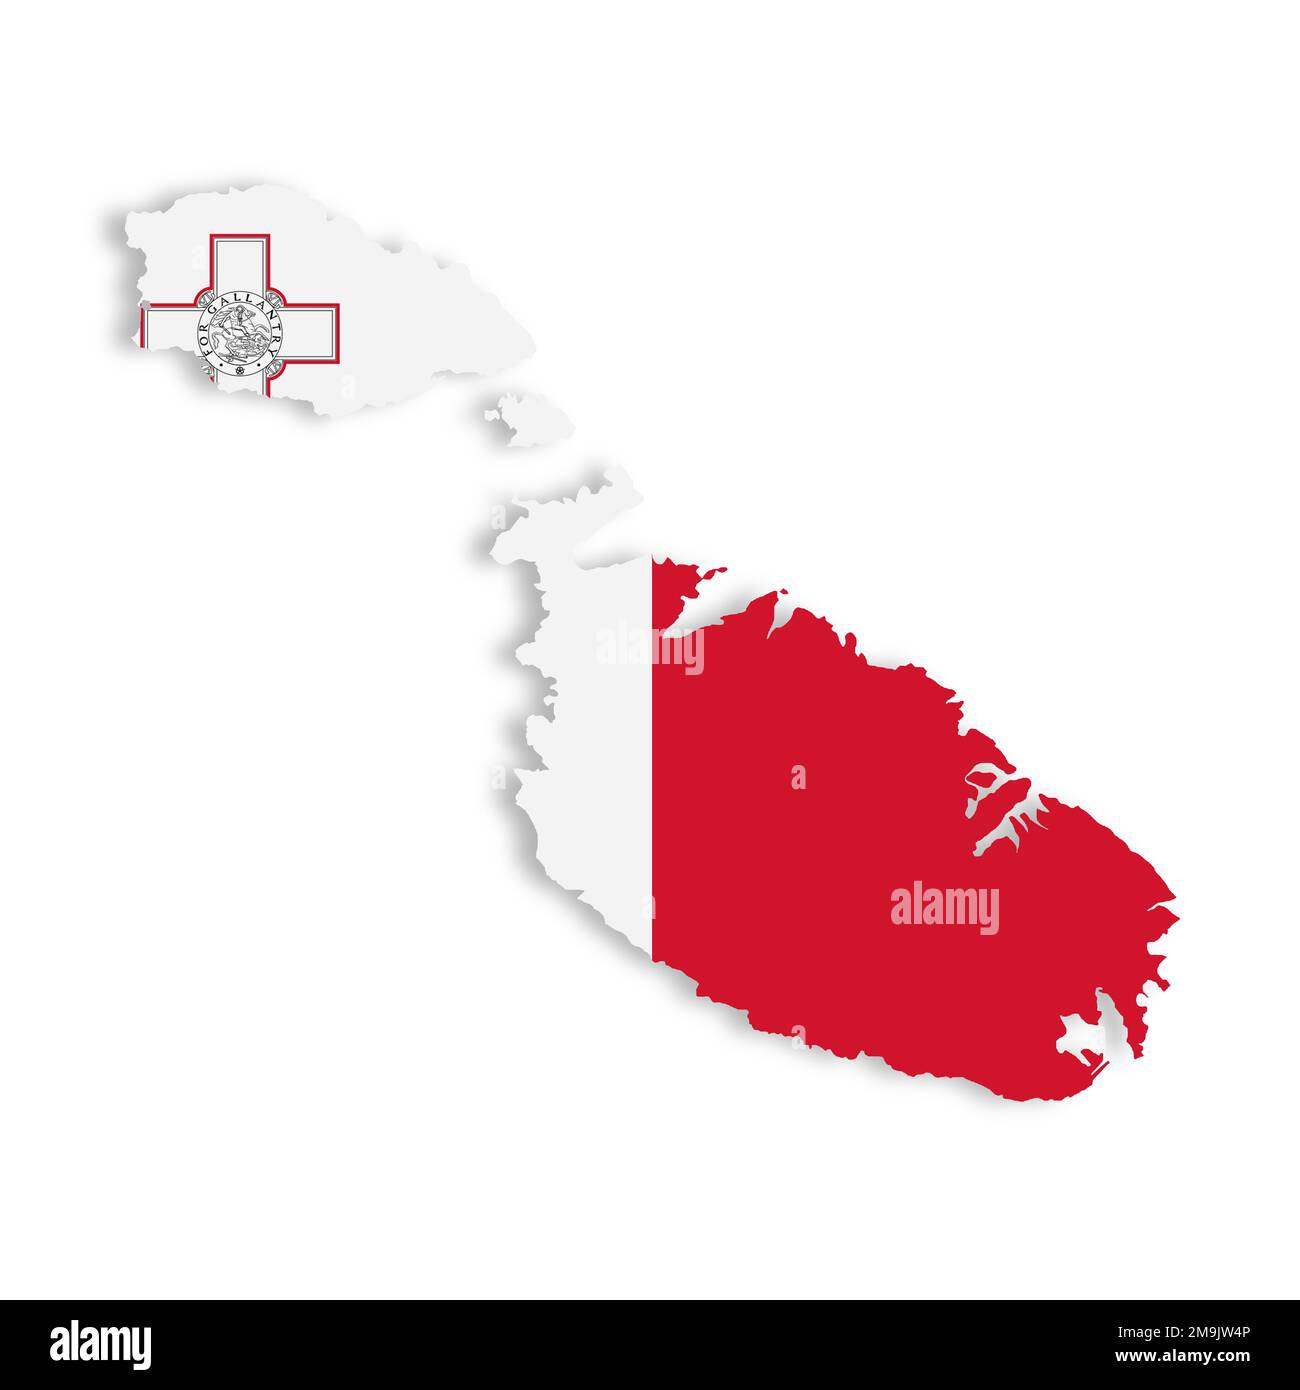 Malta map on white background with clipping path 3d illustration Stock Photo